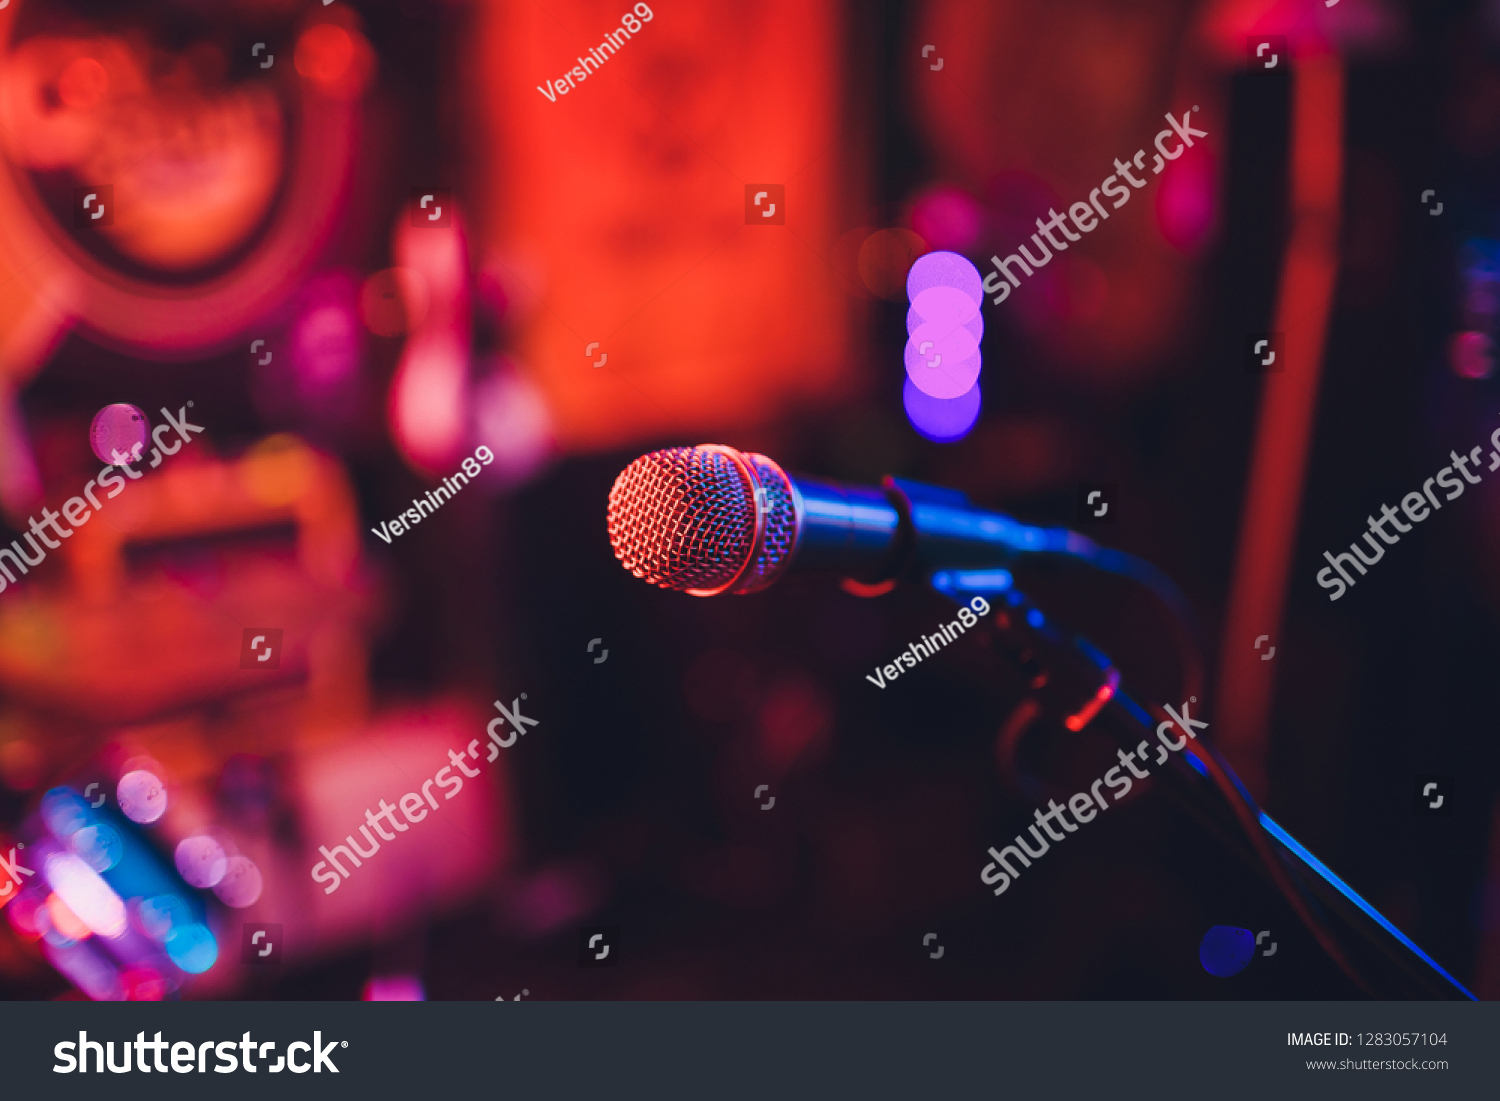 Microphone on a stand ready for live music performance or karaoke night with soft bokeh lights and people silhouettes in the background. Concept for musical singing event, having a good time. #1283057104